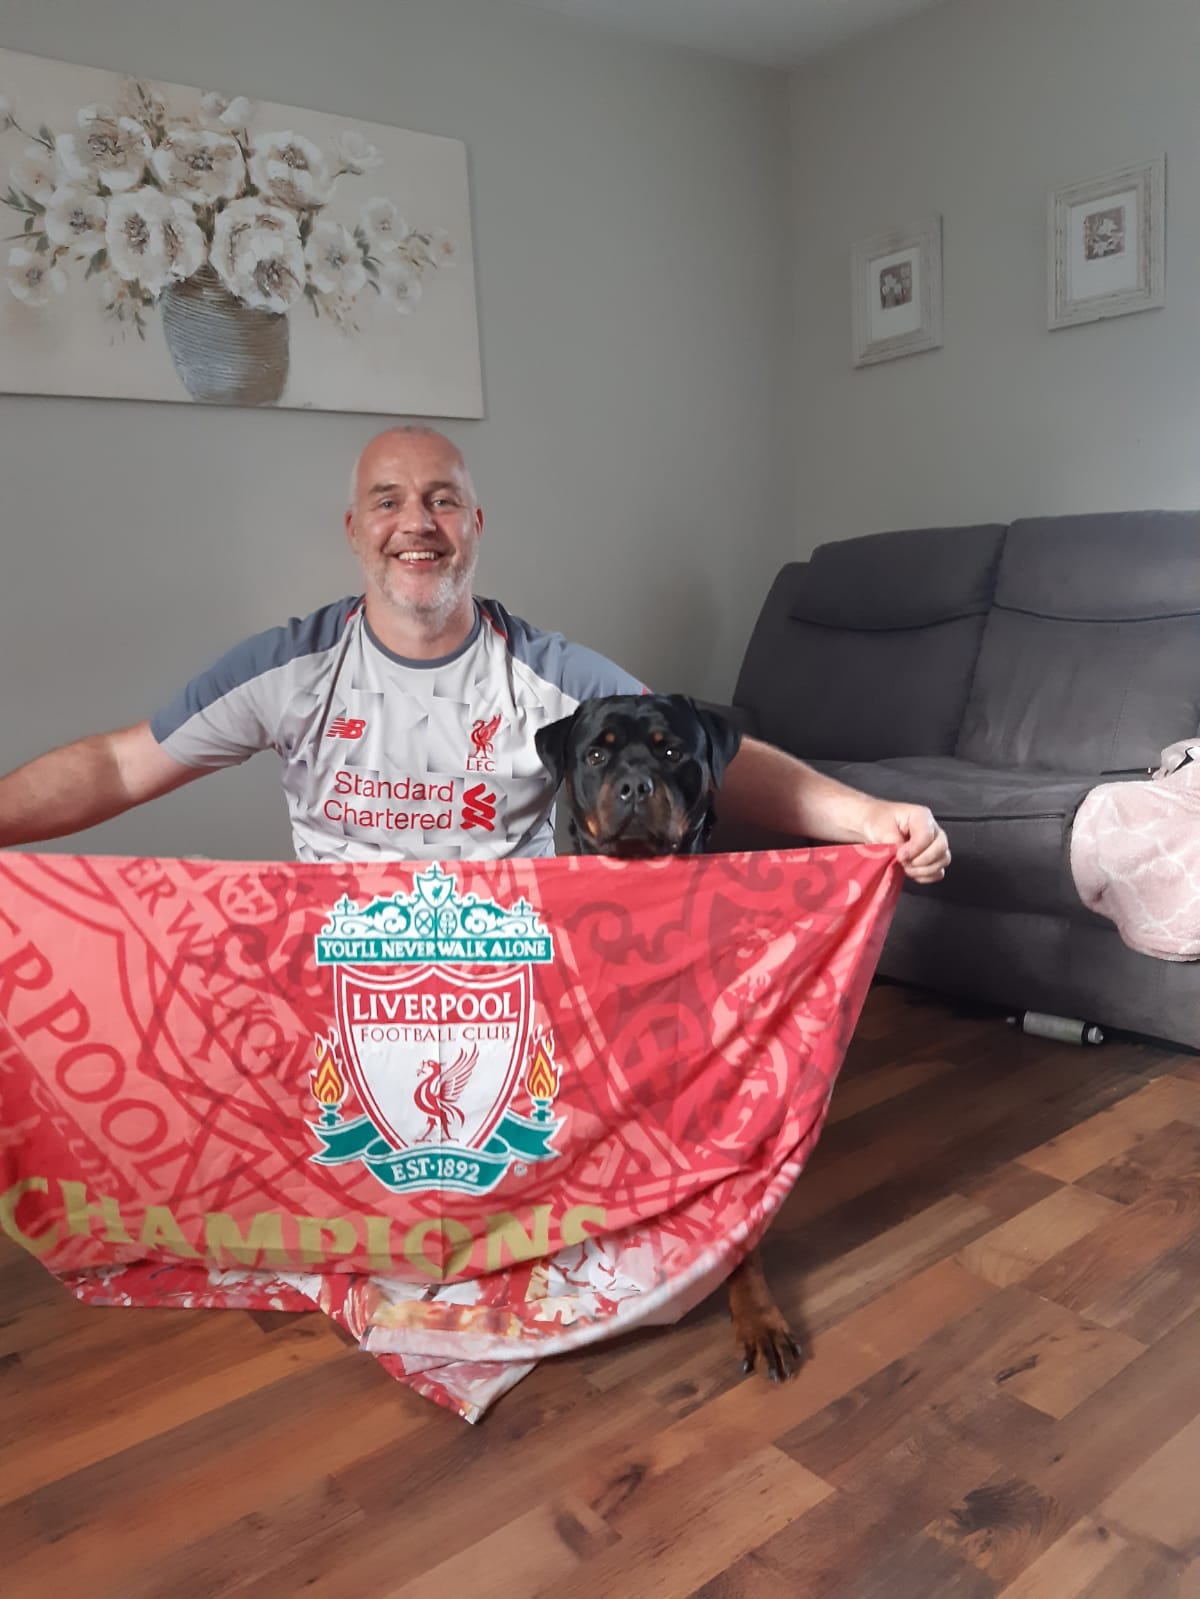 Liverpool No1 fan and human